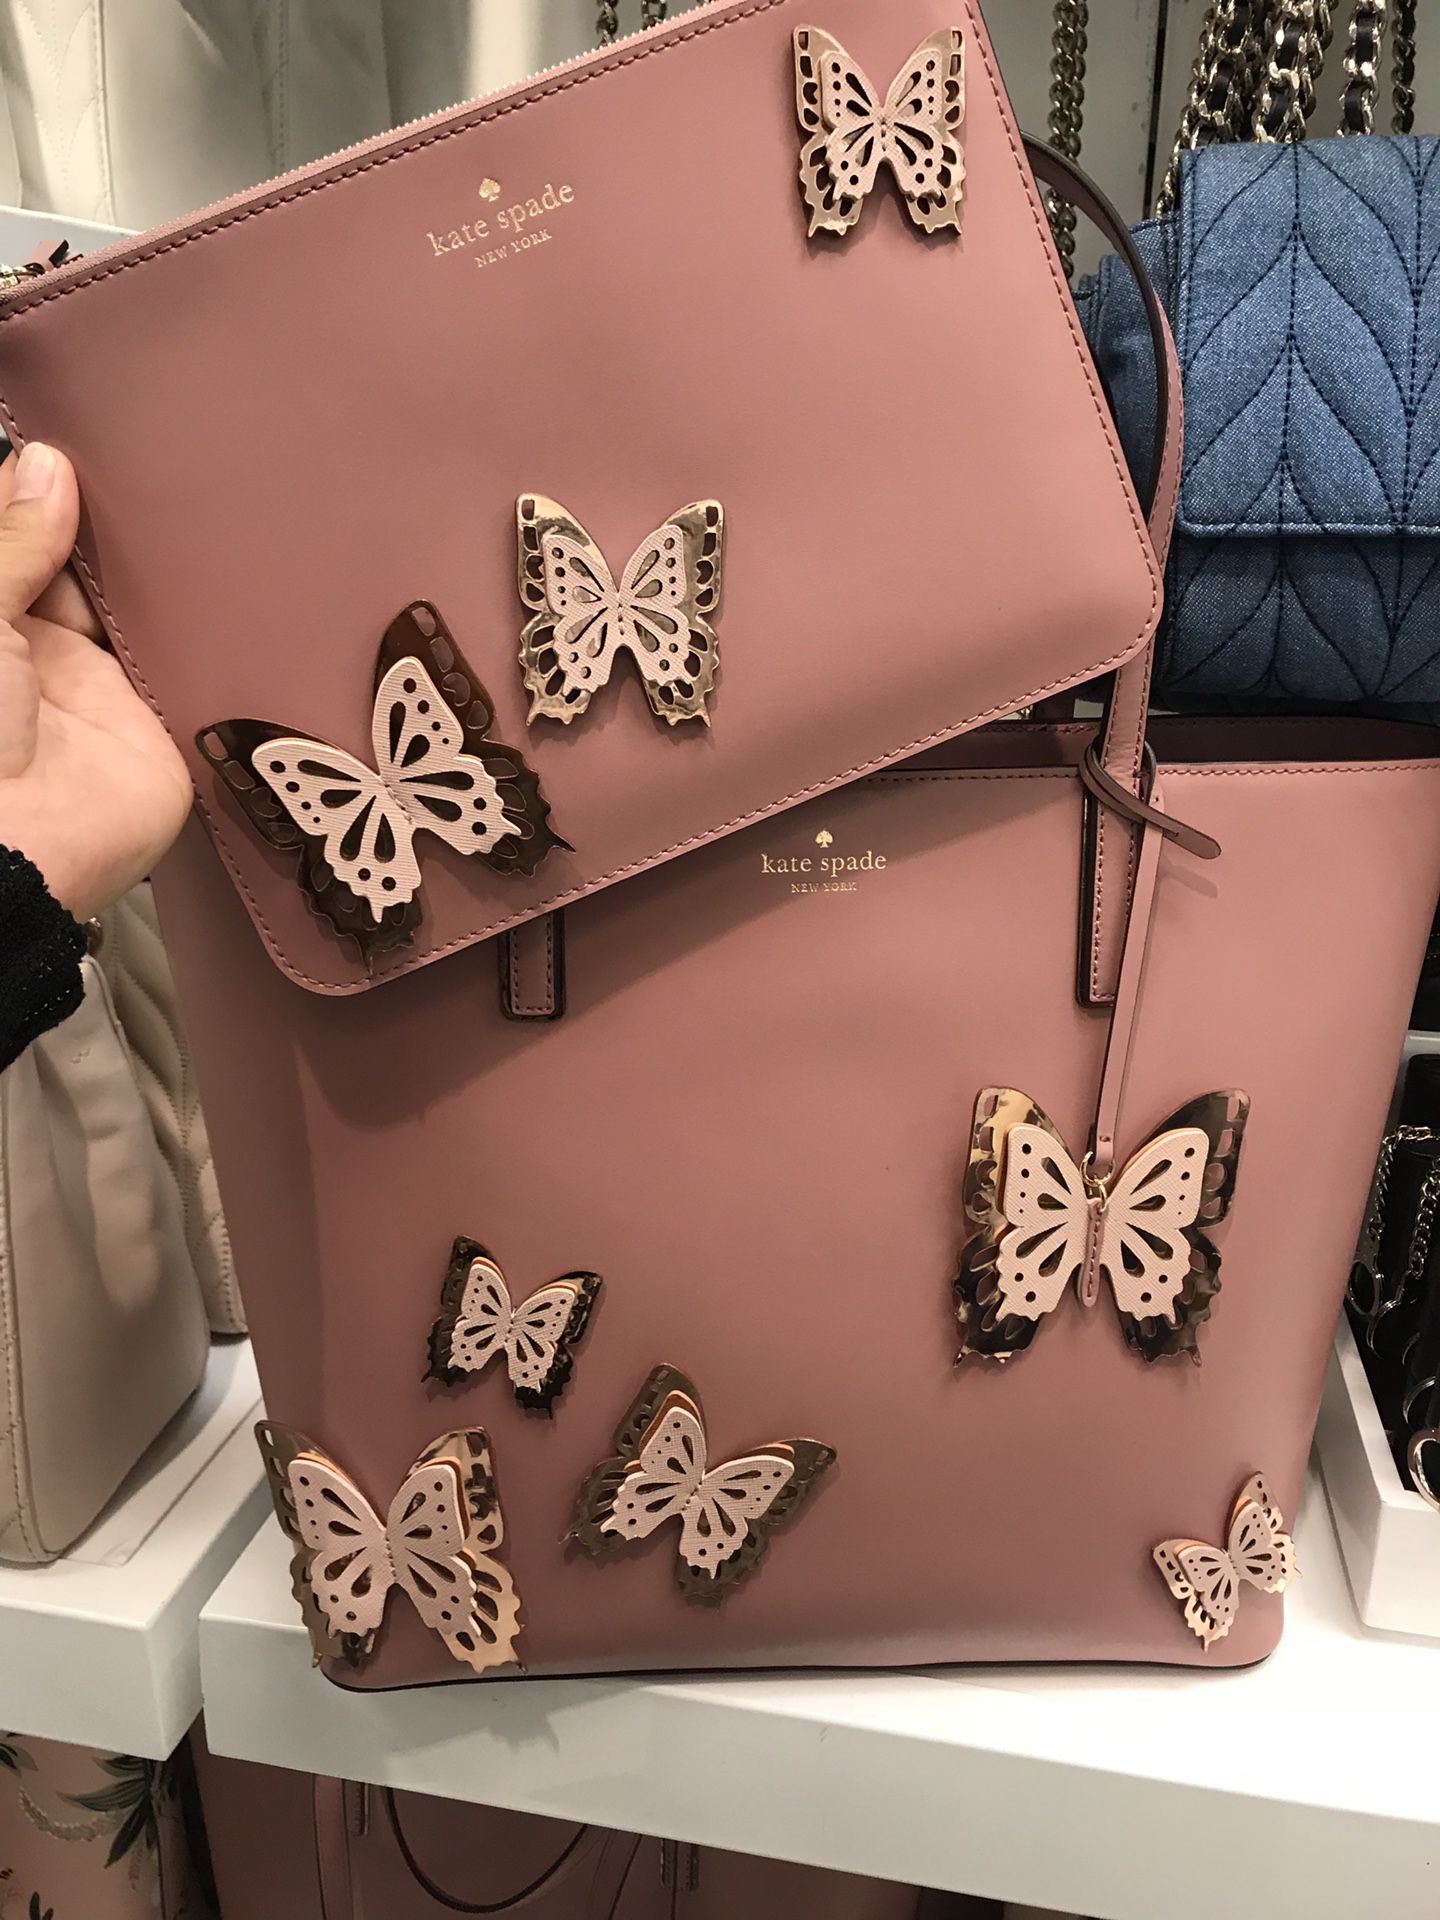 Kate Spade Butterfly Tote w Large Pouch for Sale in Katy, TX - OfferUp